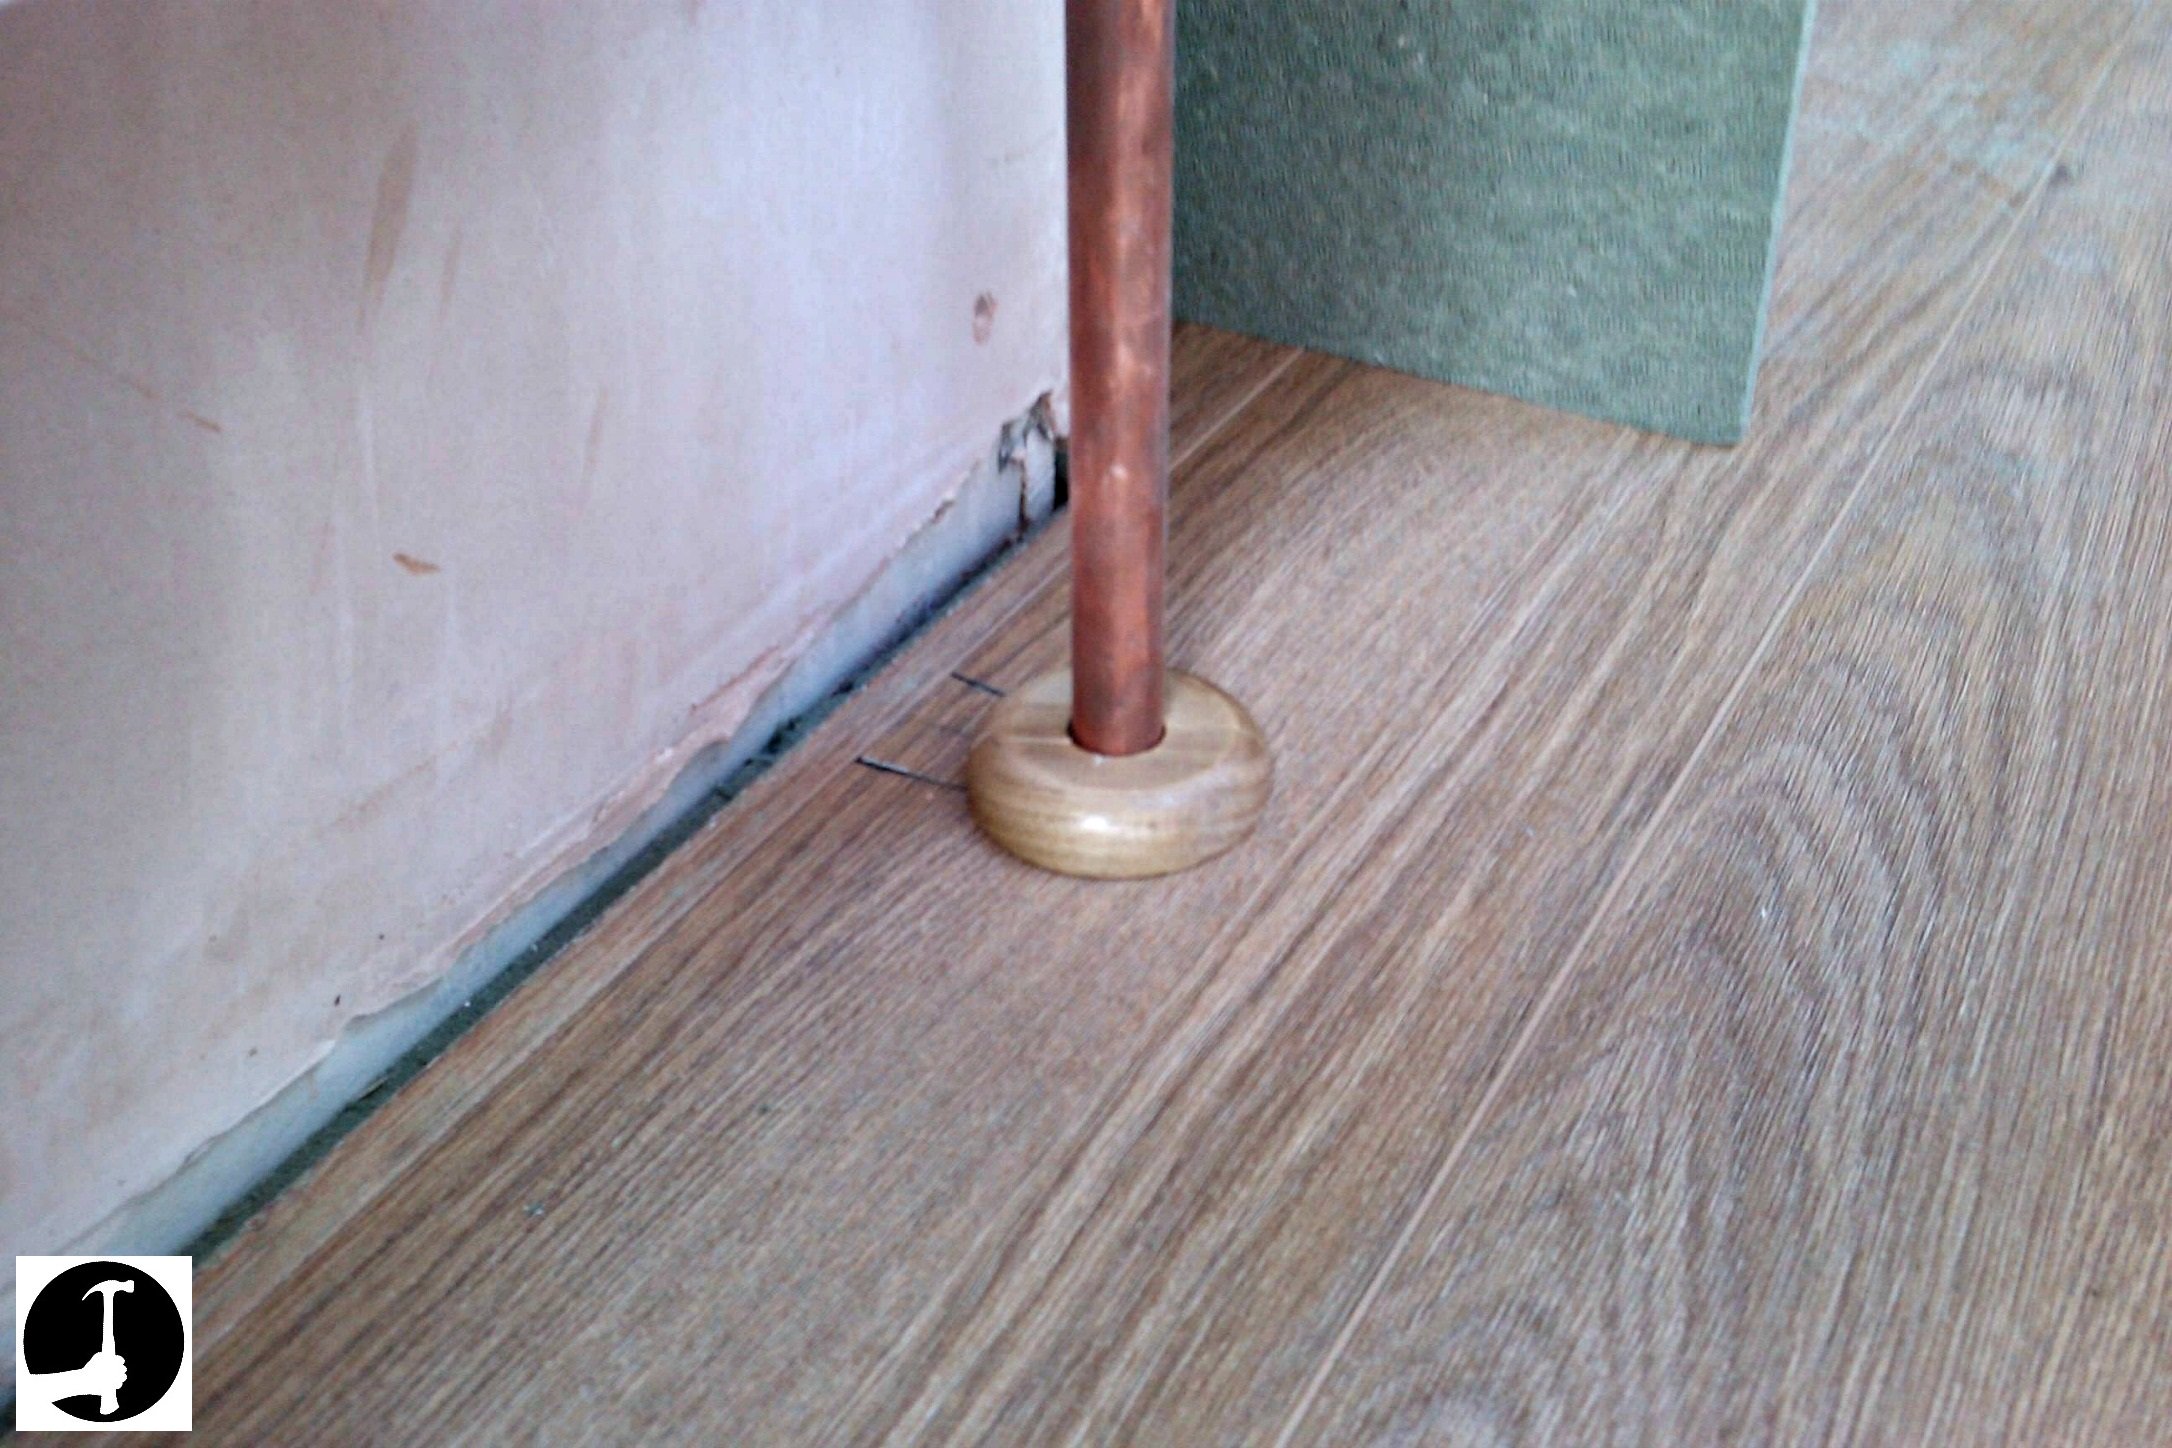 See How I Install Laminate Flooring To, How To Cut Tile Around Radiator Pipes